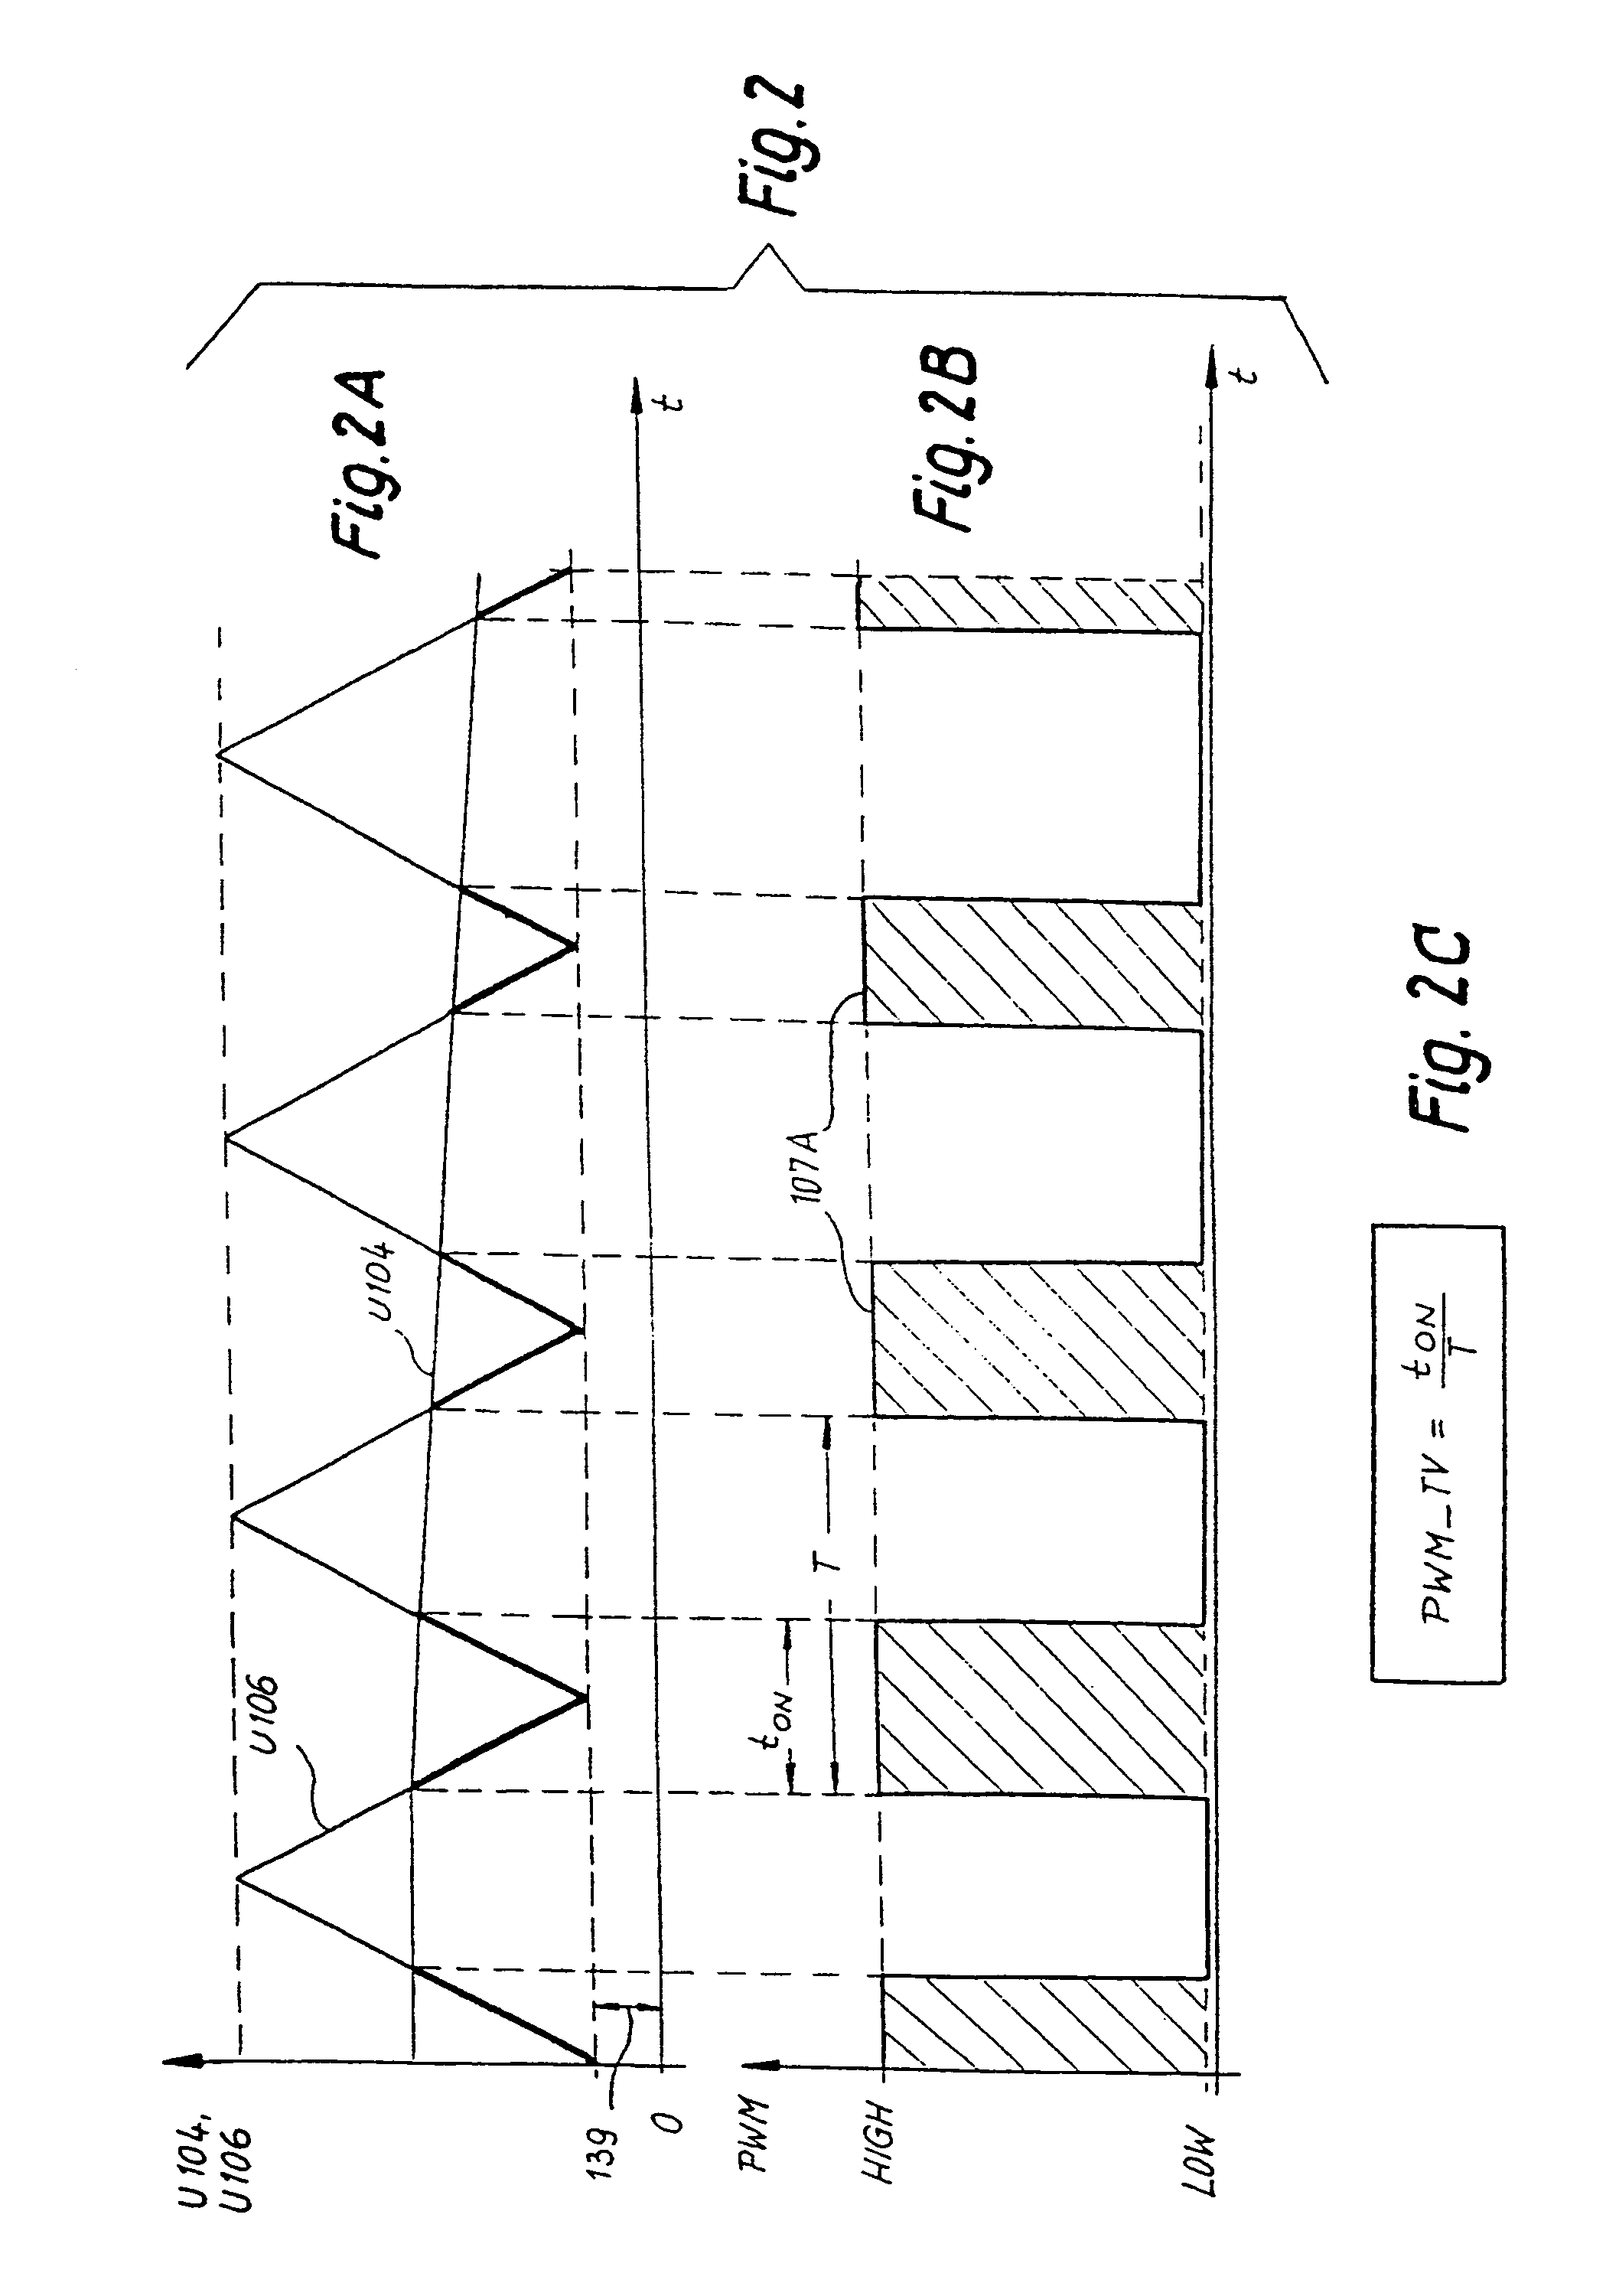 Method for configuring the alarm device of an electrical motor and motor for implementing said method